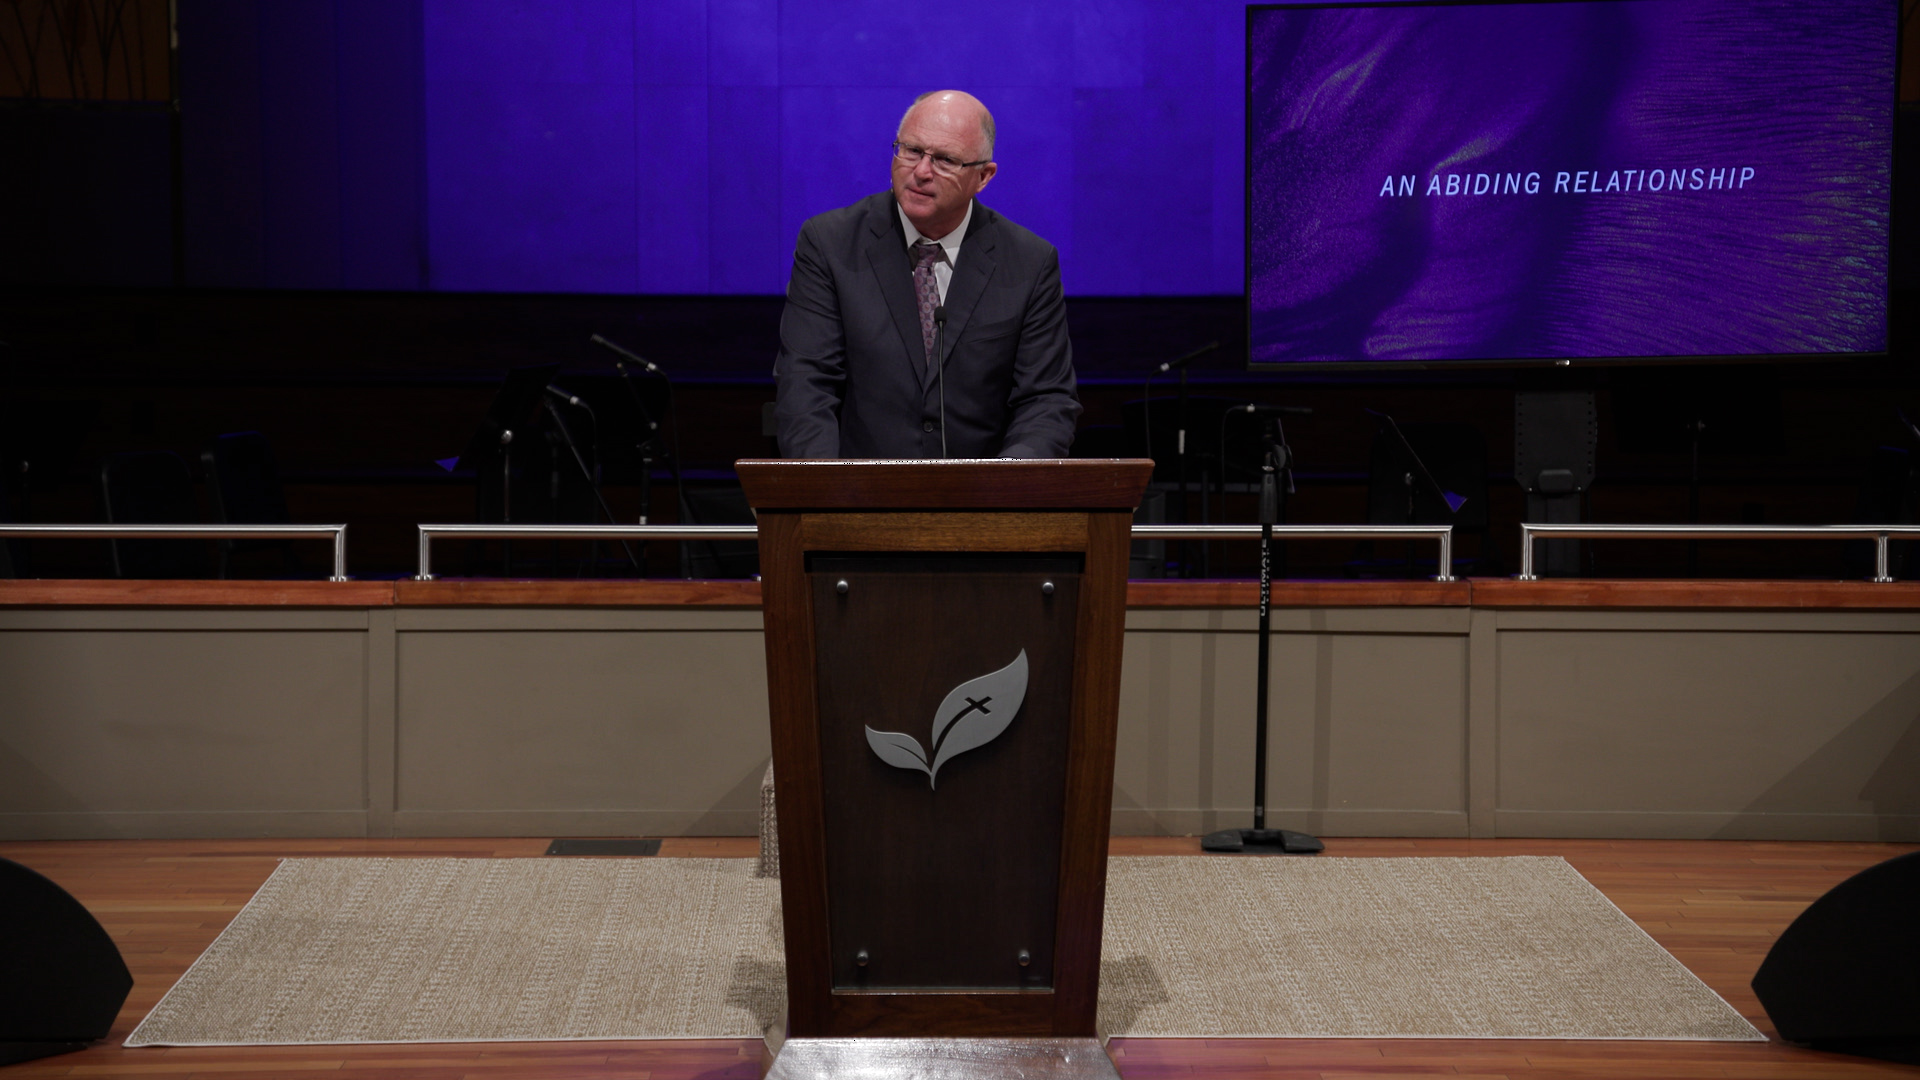 Pastor Paul Chappell: The Priority of Abiding